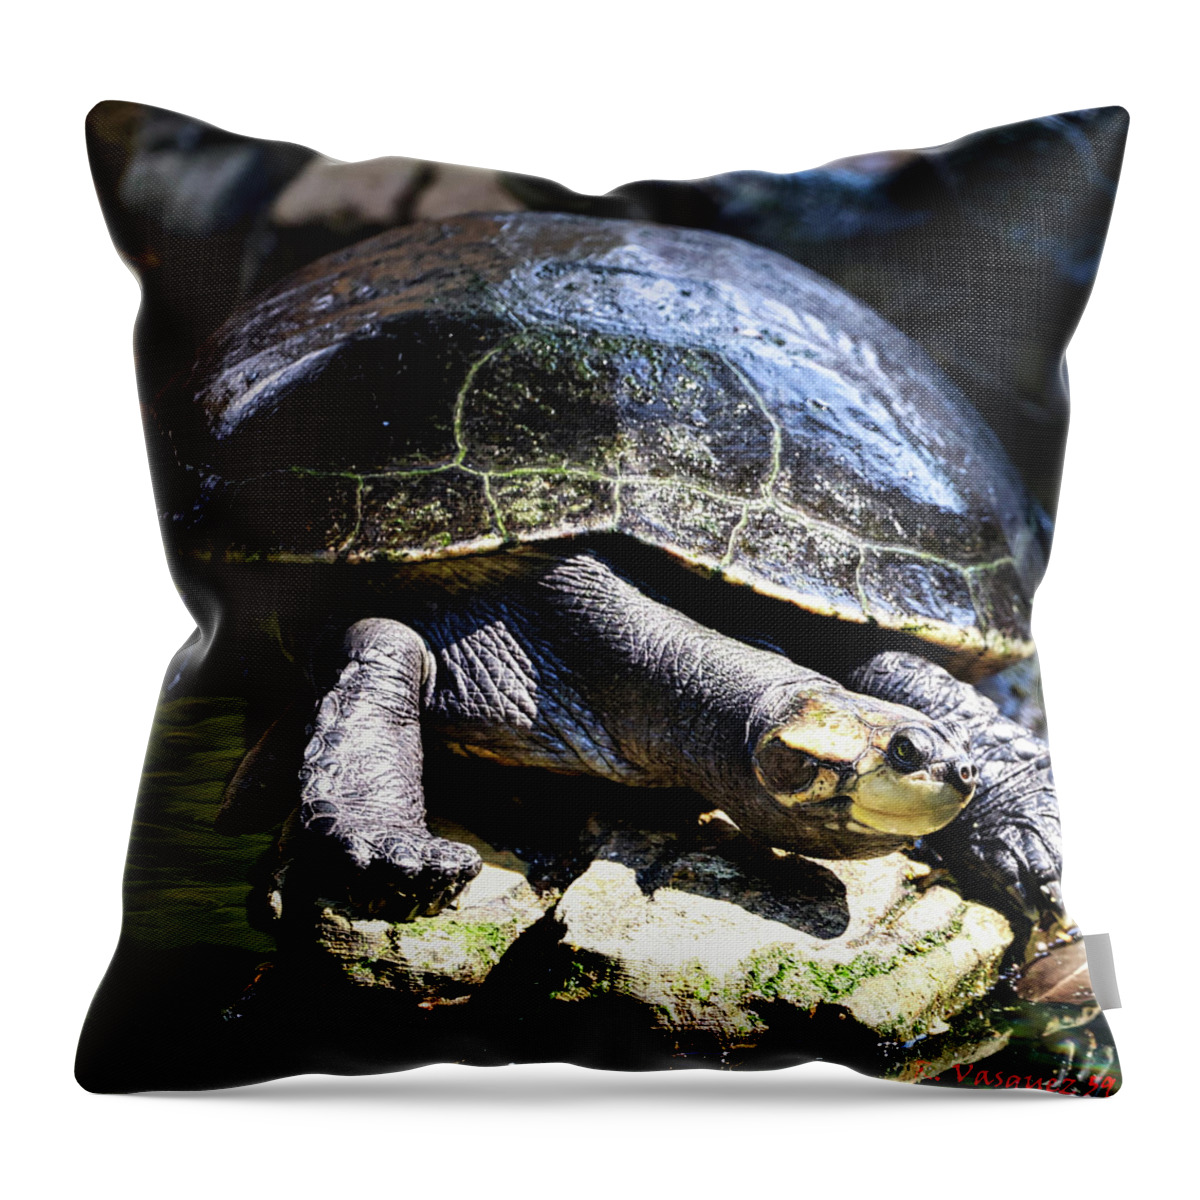 Turtle Throw Pillow featuring the photograph Arrau Turtle by Rene Vasquez